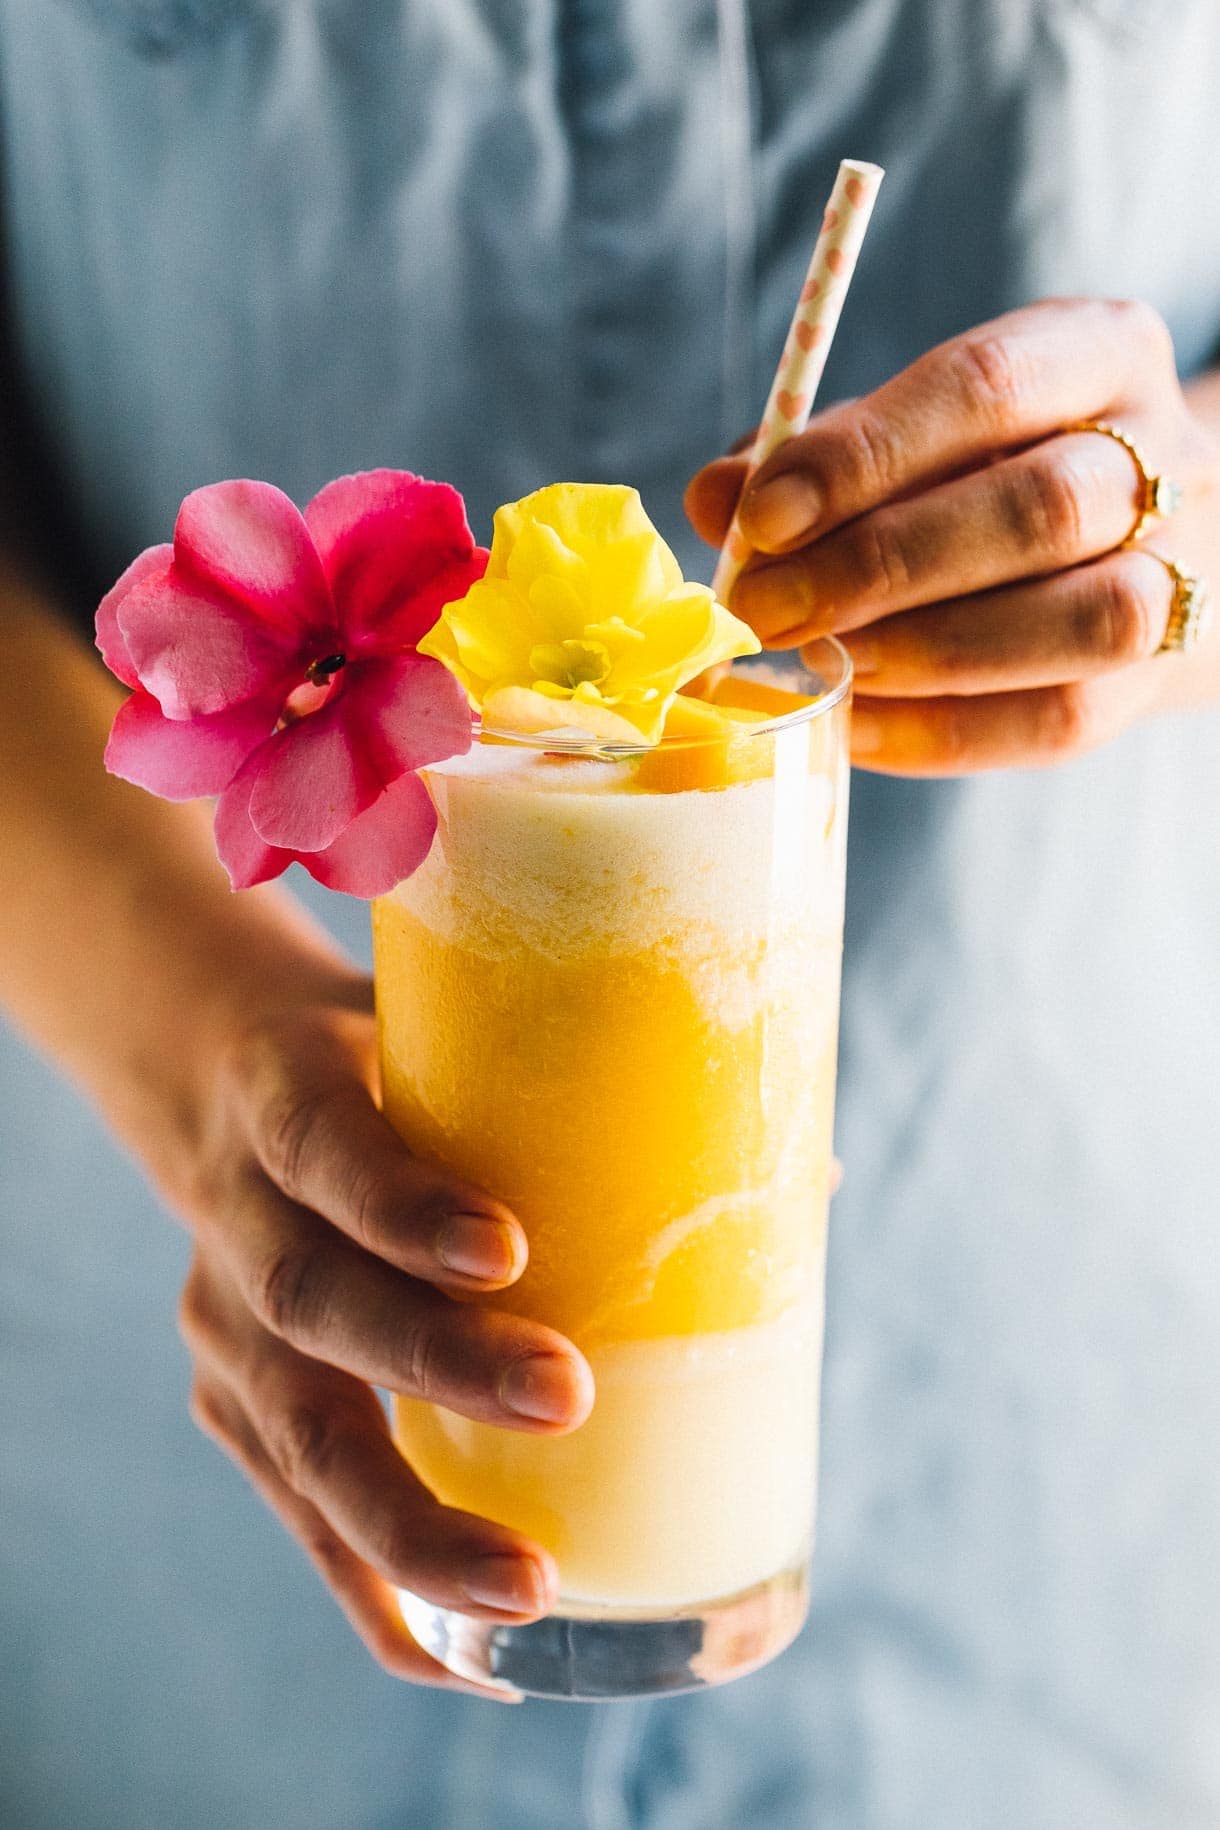 girl holding a mango lava flow cocktail, with one yellow and one pink flower as a garnish.